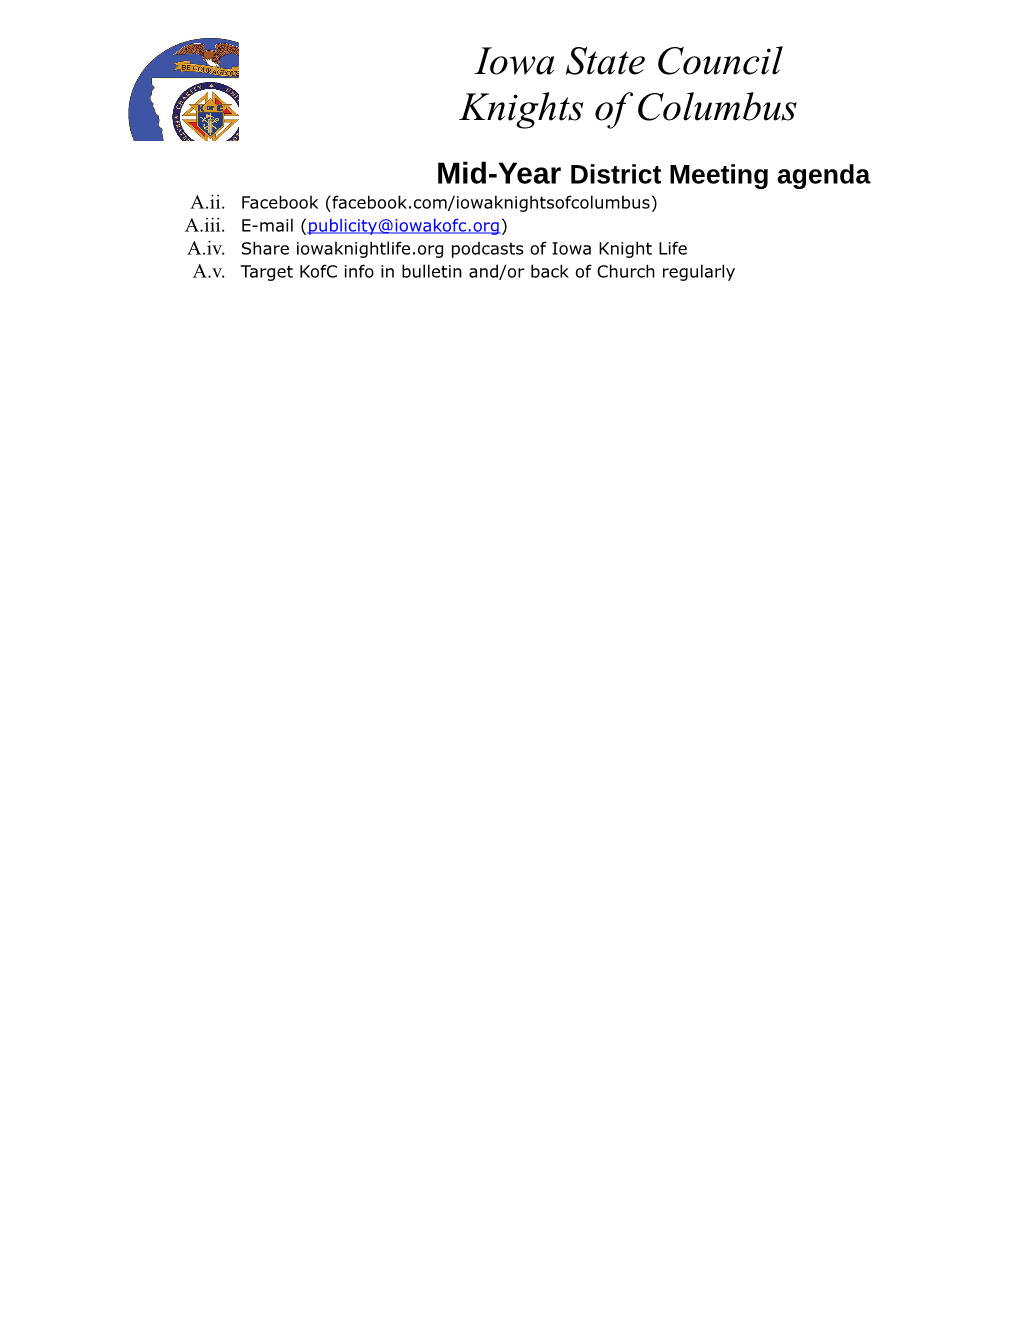 Mid-Year District Meeting Agenda